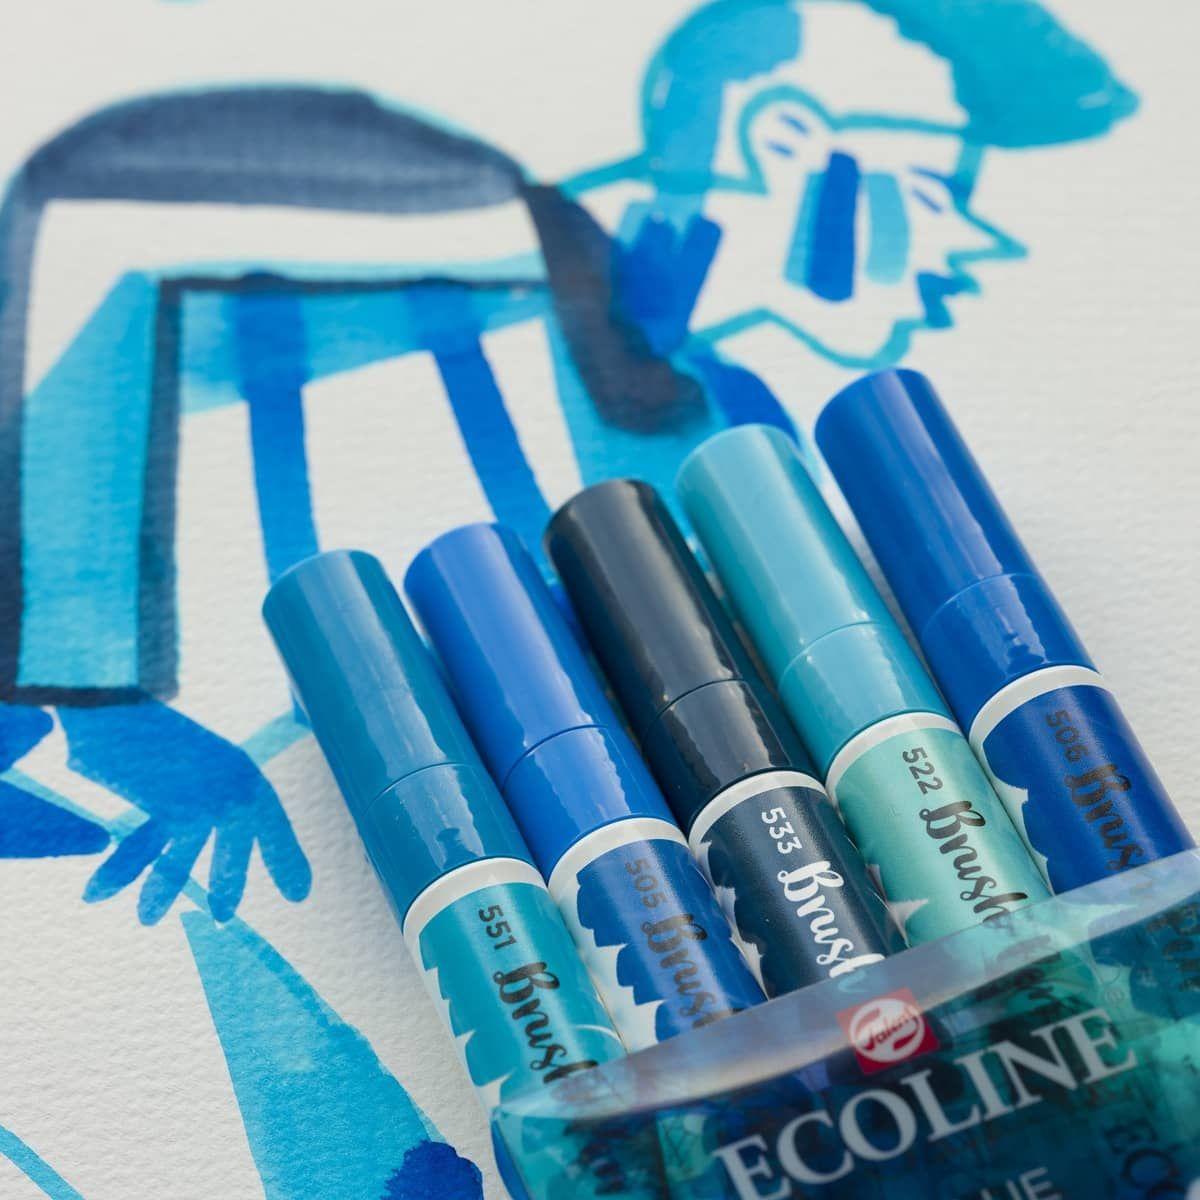 Blues - Ecoline Watercolor Water-Based Brush Pen Sets